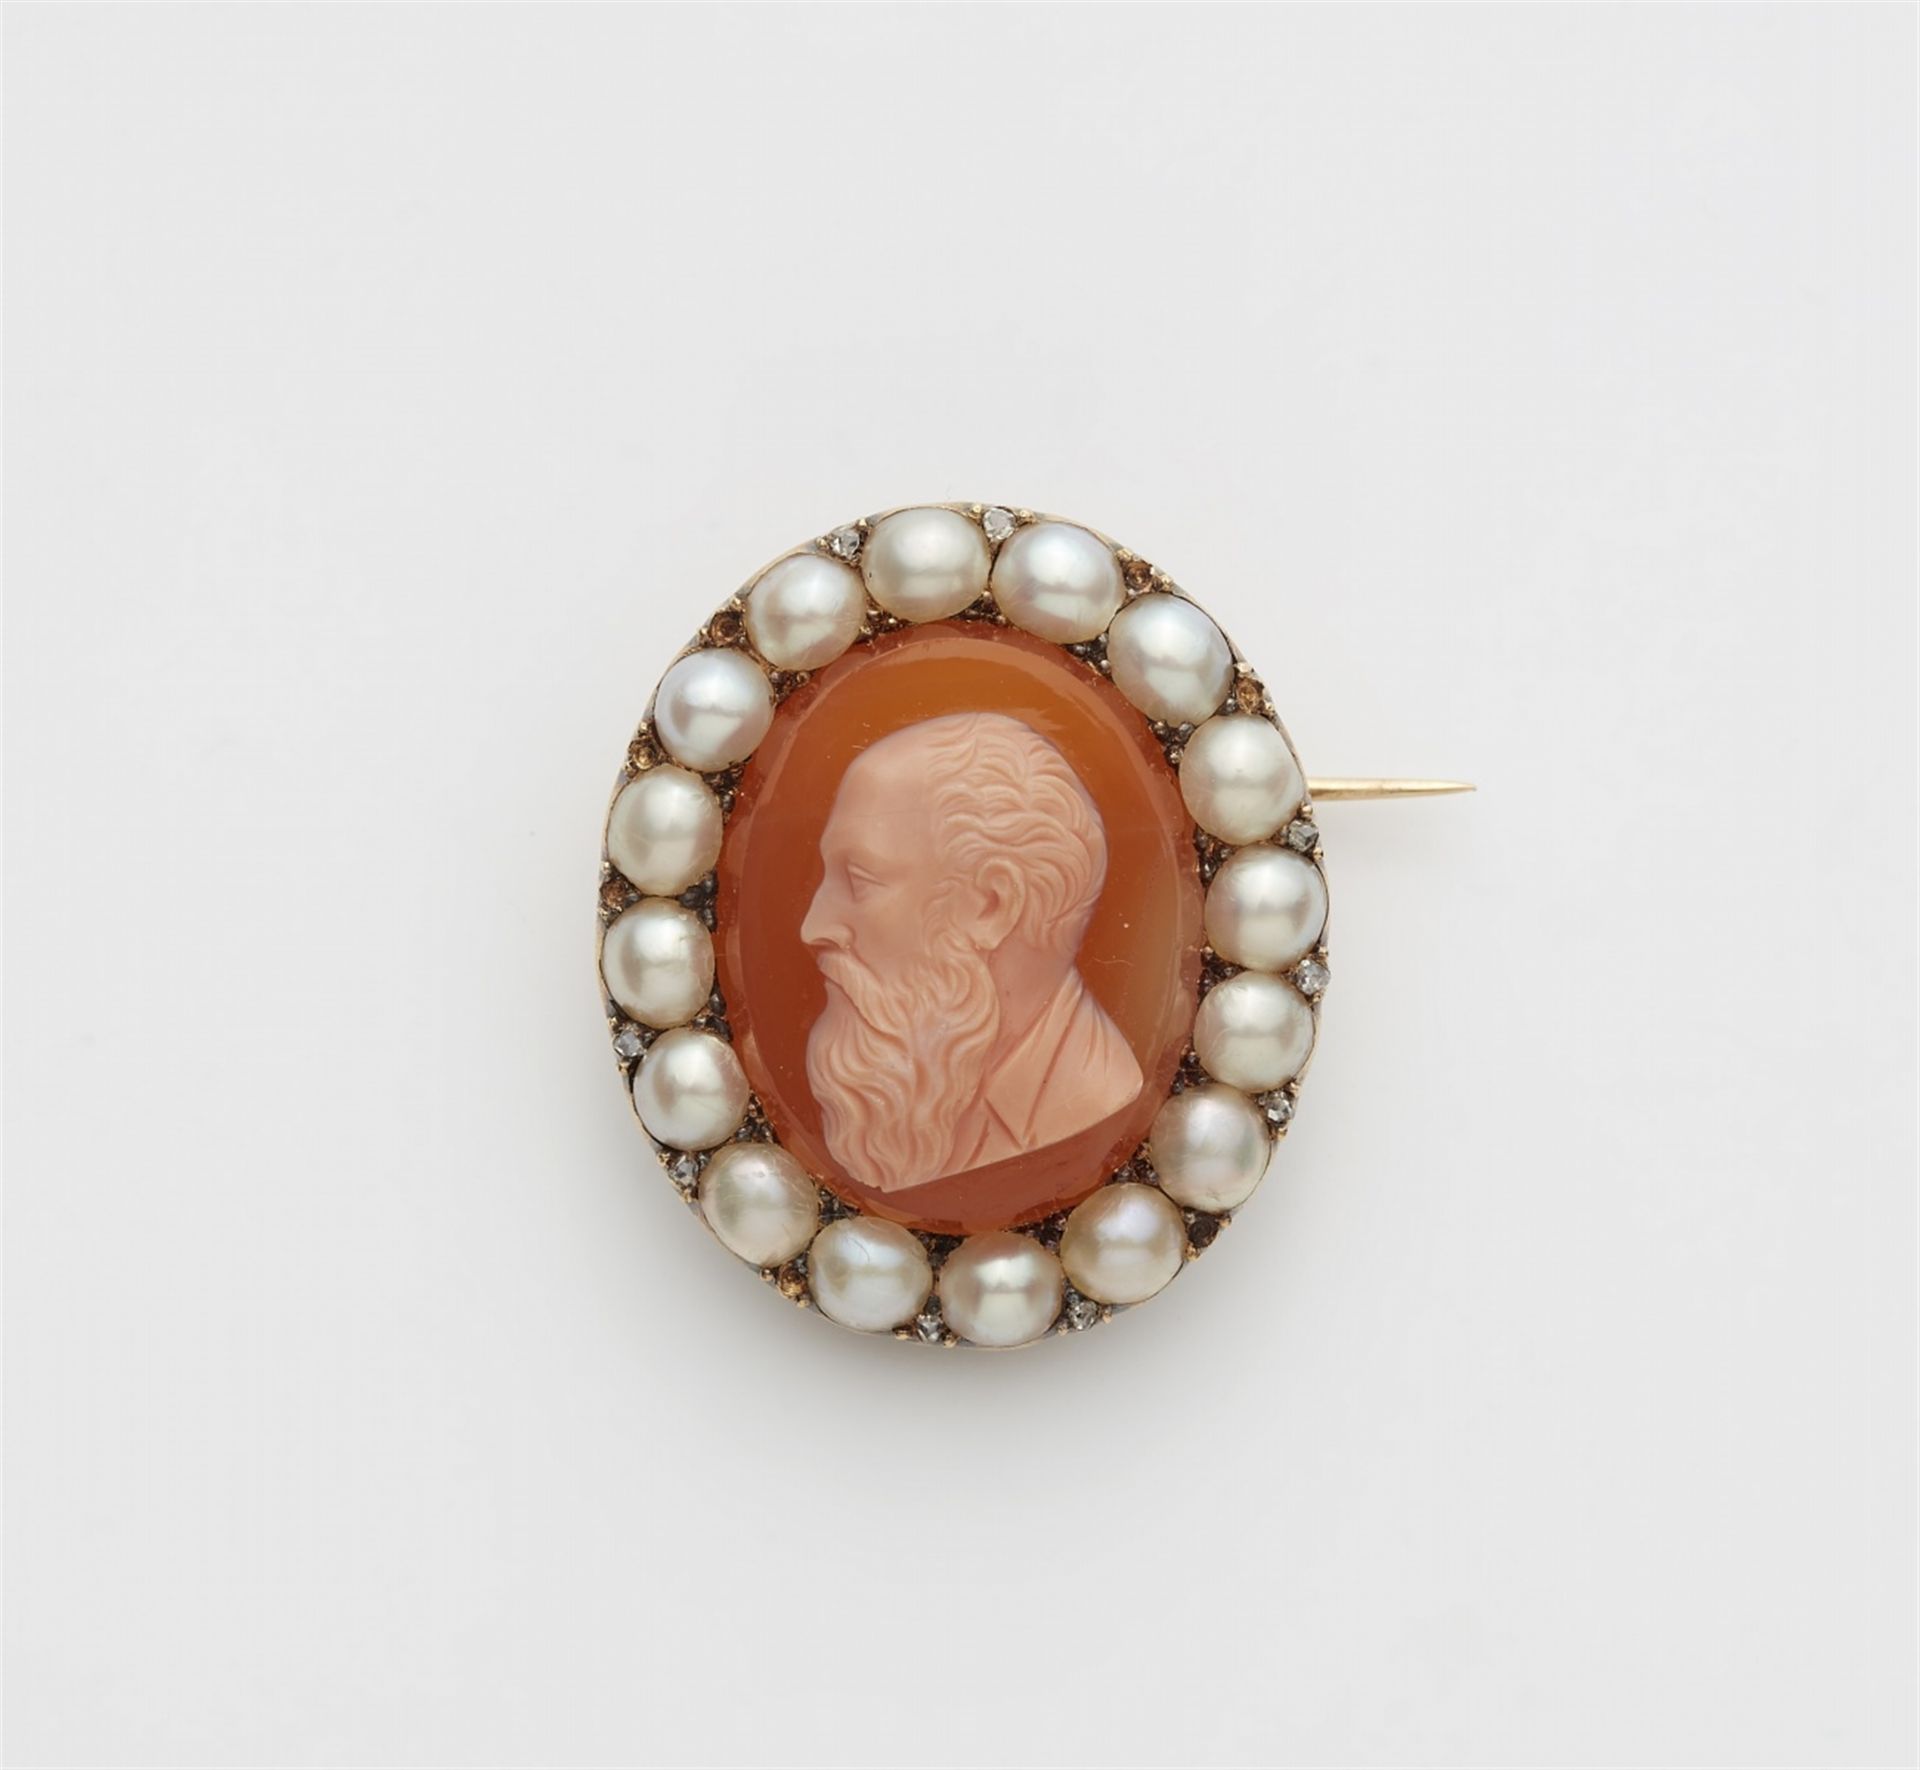 An 18k gold agate cameo and pearl brooch